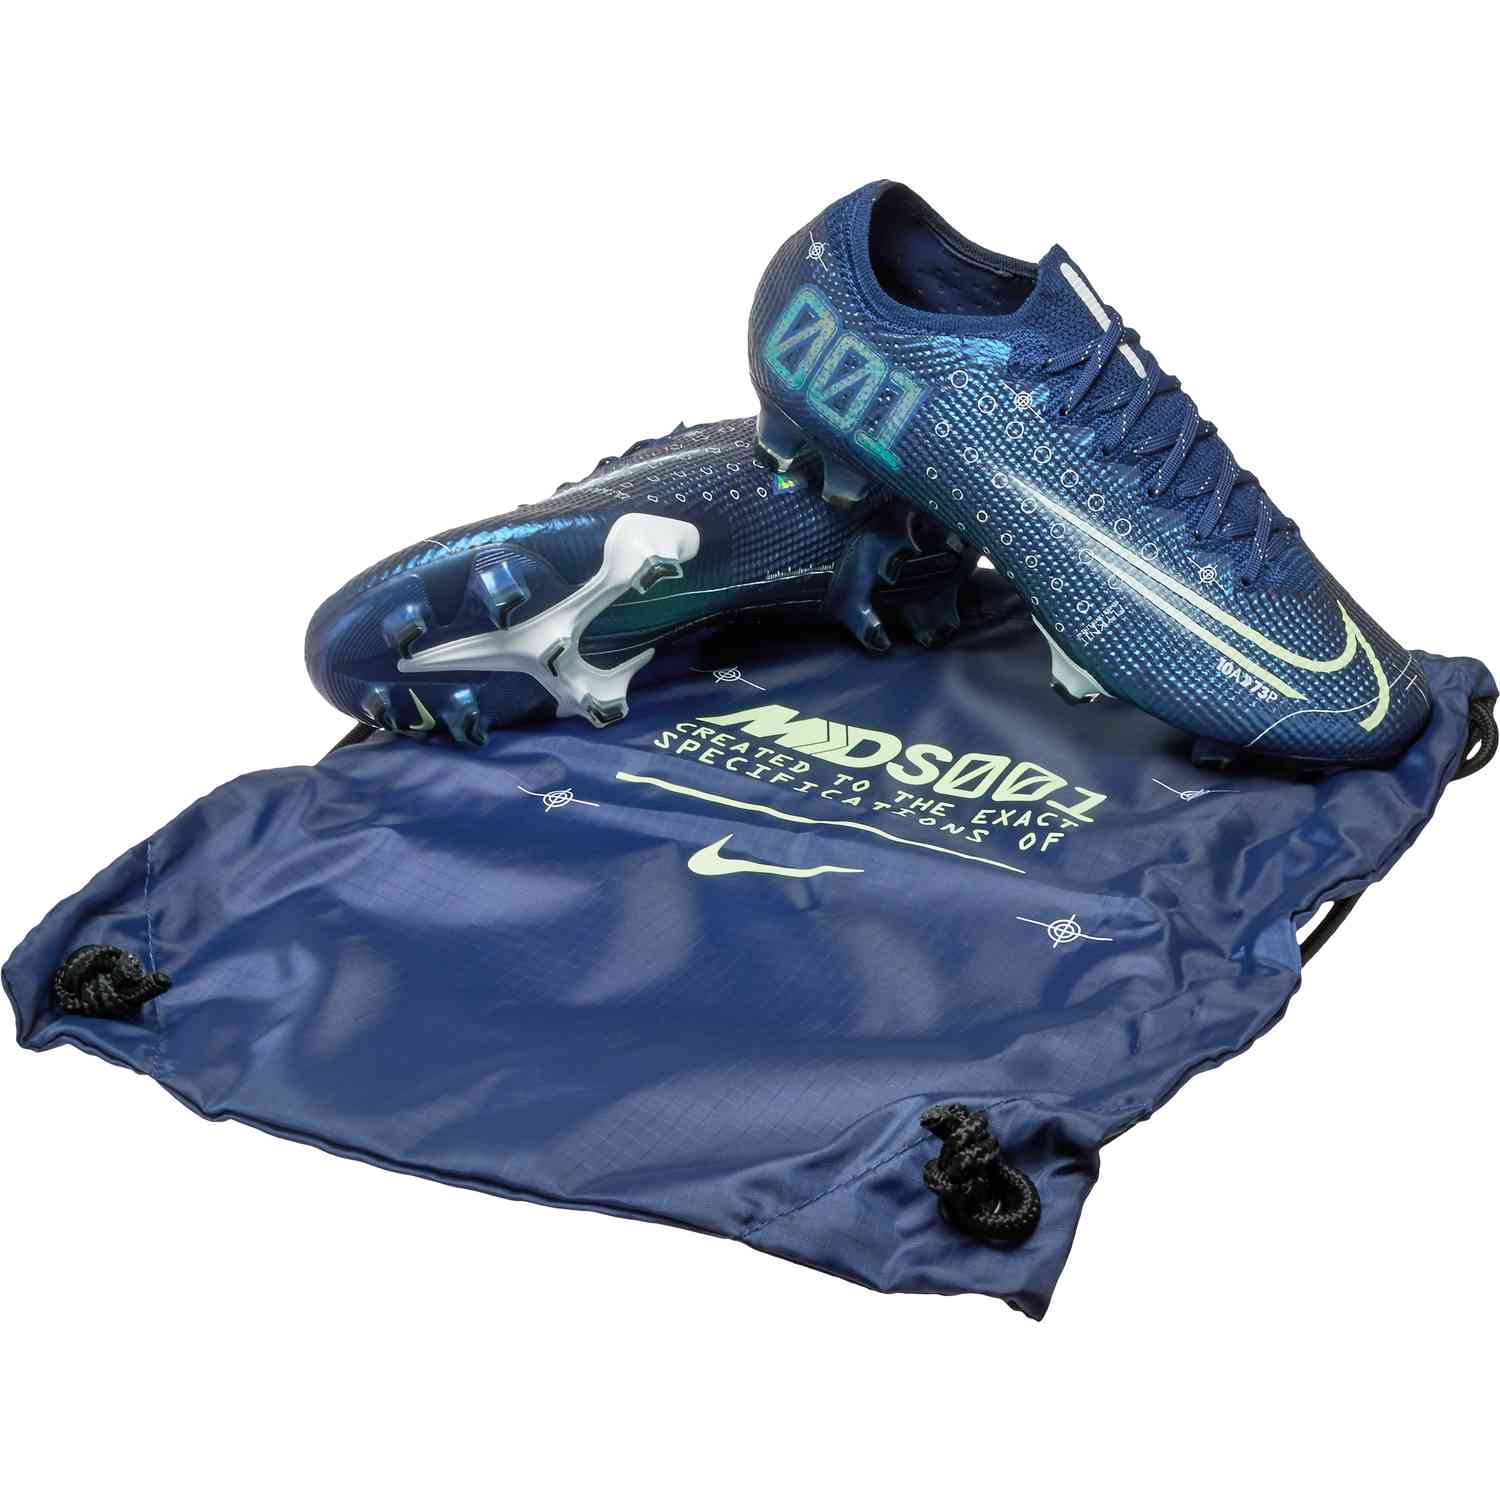 Nike releases the new Mercurial Dream Speed 2 nss magazine